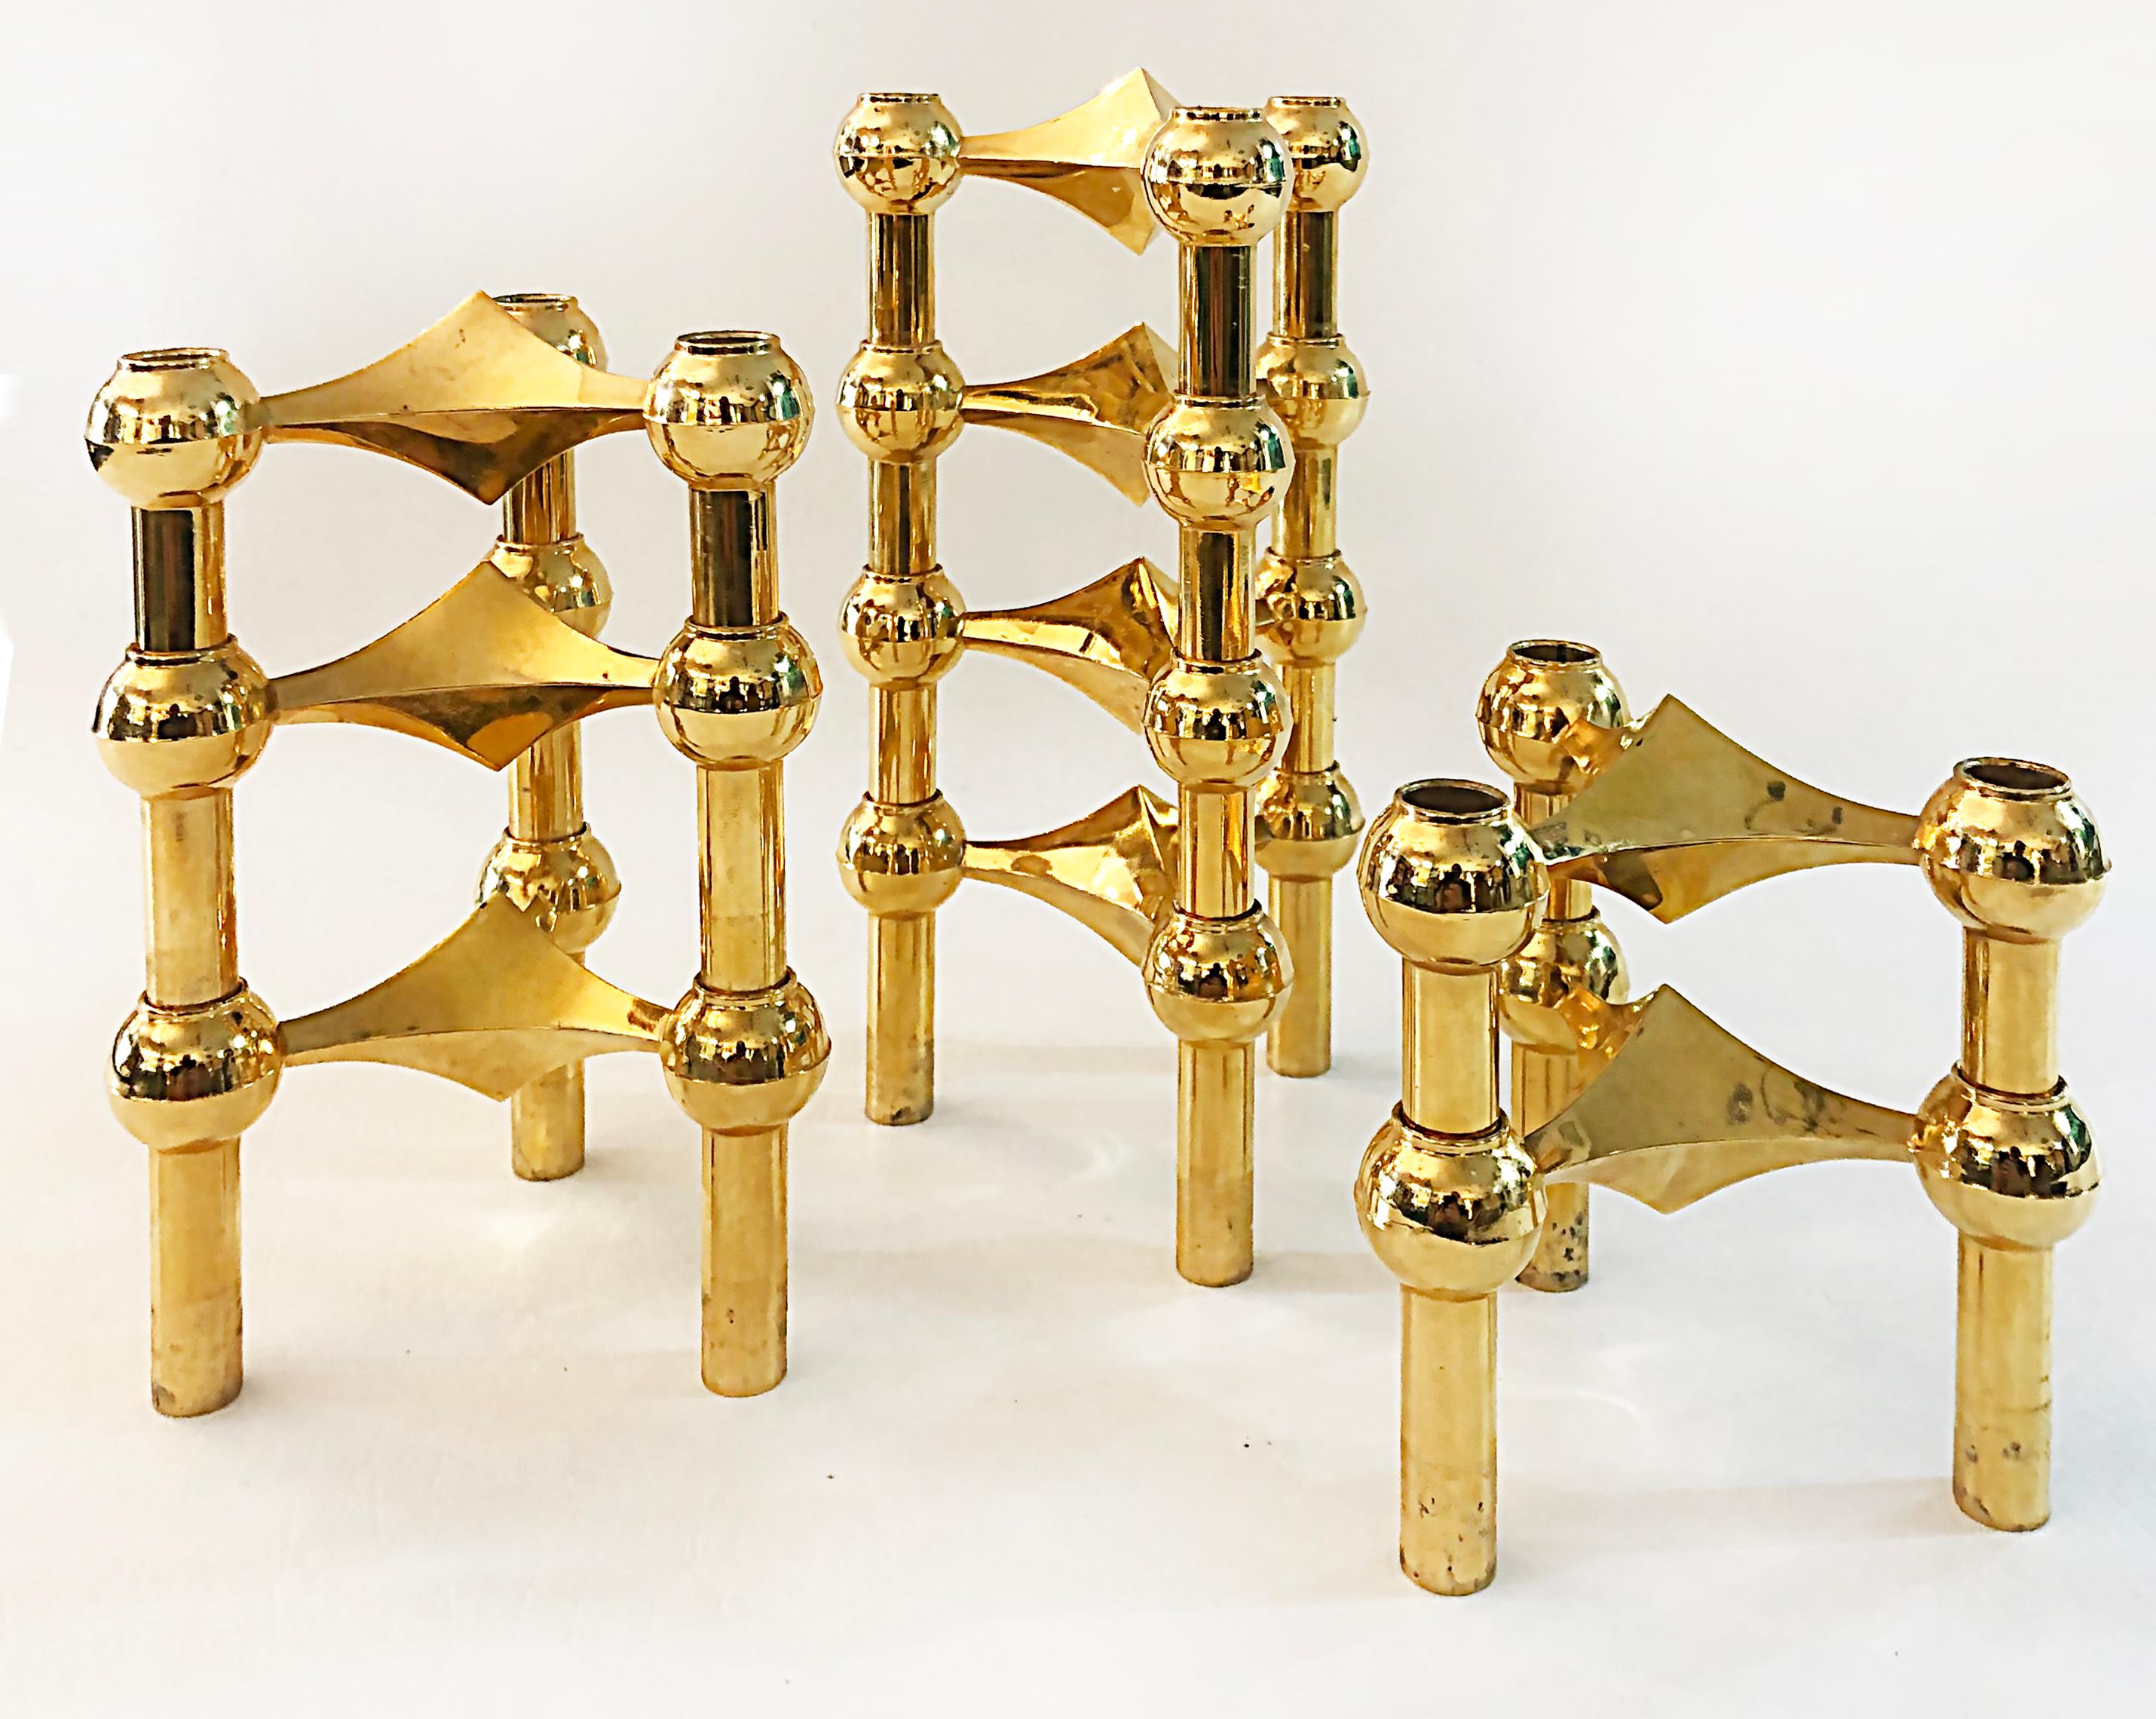 Brass Werner stoff candle holders for hans nagel, set of 9


Offered for sale is a set of 9 brass Stoff Nagel candle holders originally designed by architect Werner Stoff for metalworker Hans Nagel in the 1960s. The modular candle holders can be